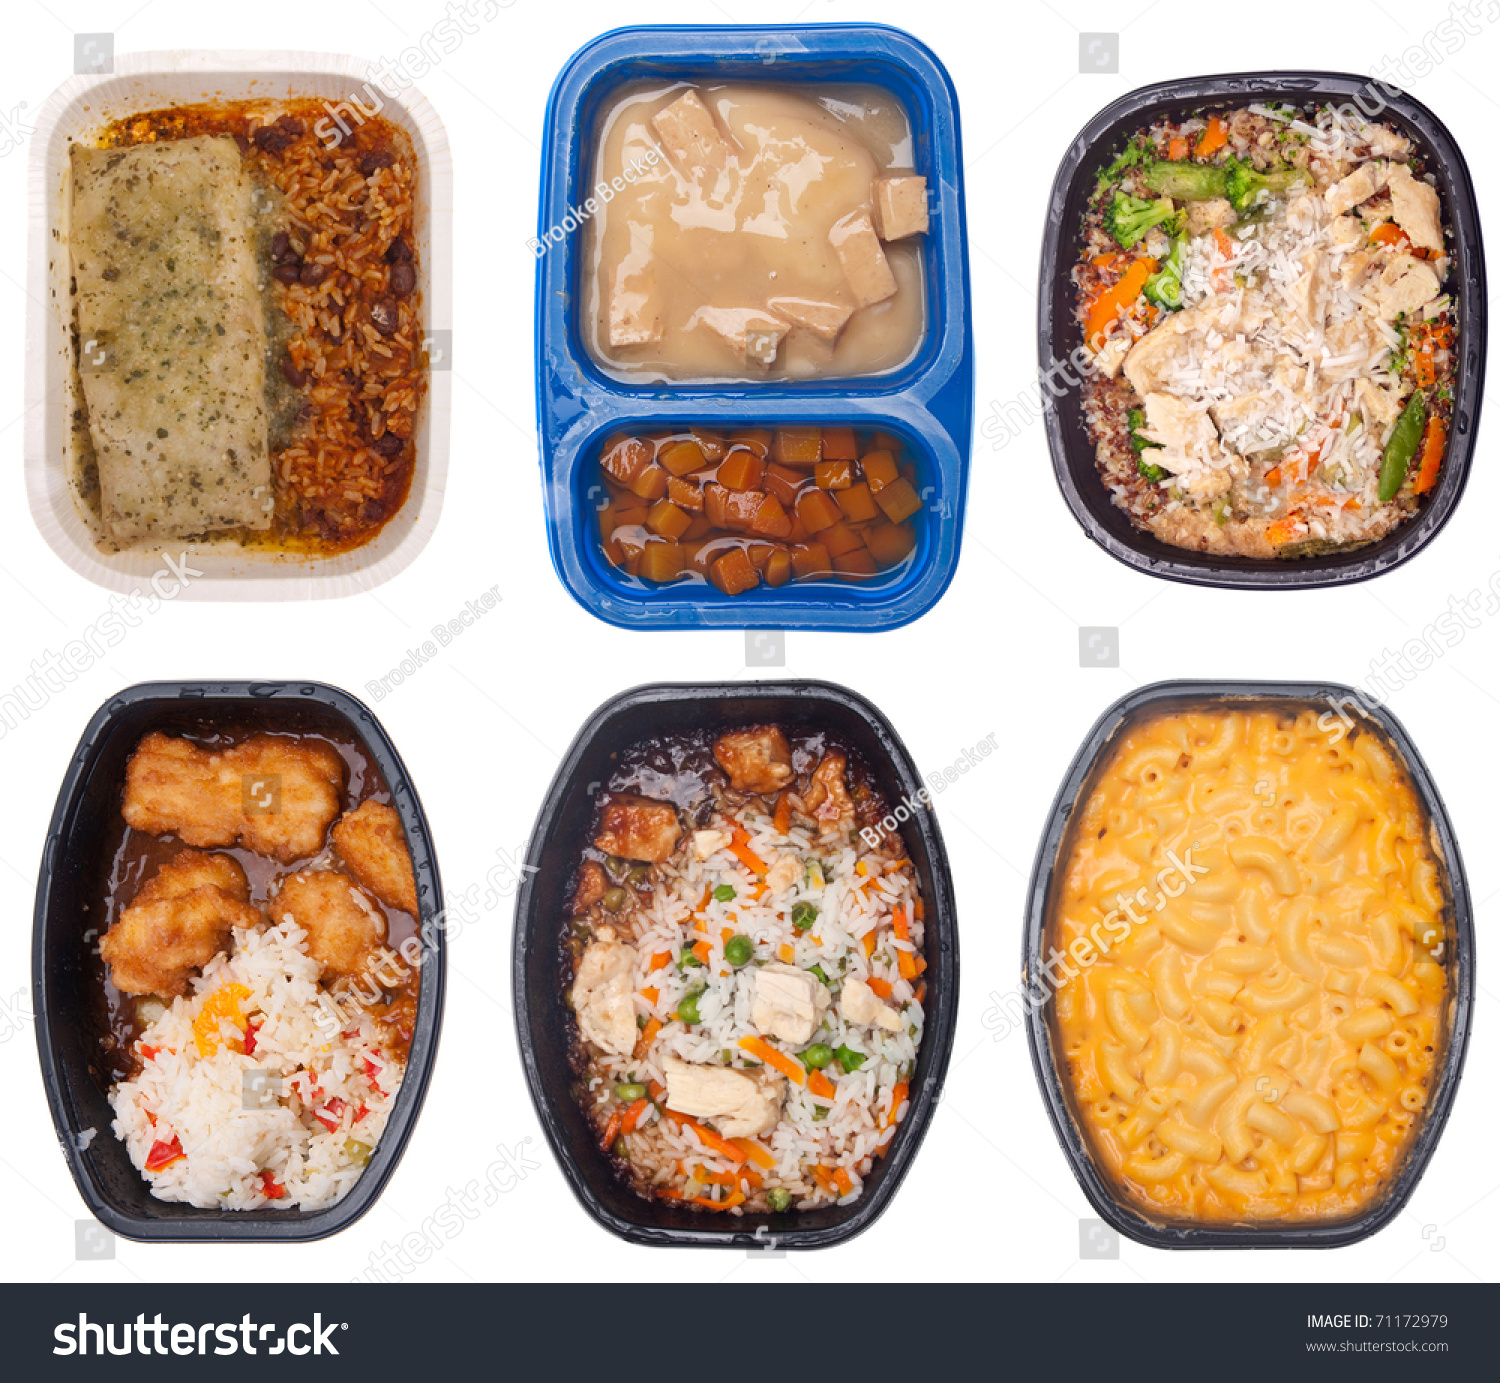 Collection of Six TV Dinners Isolated on White. #71172979